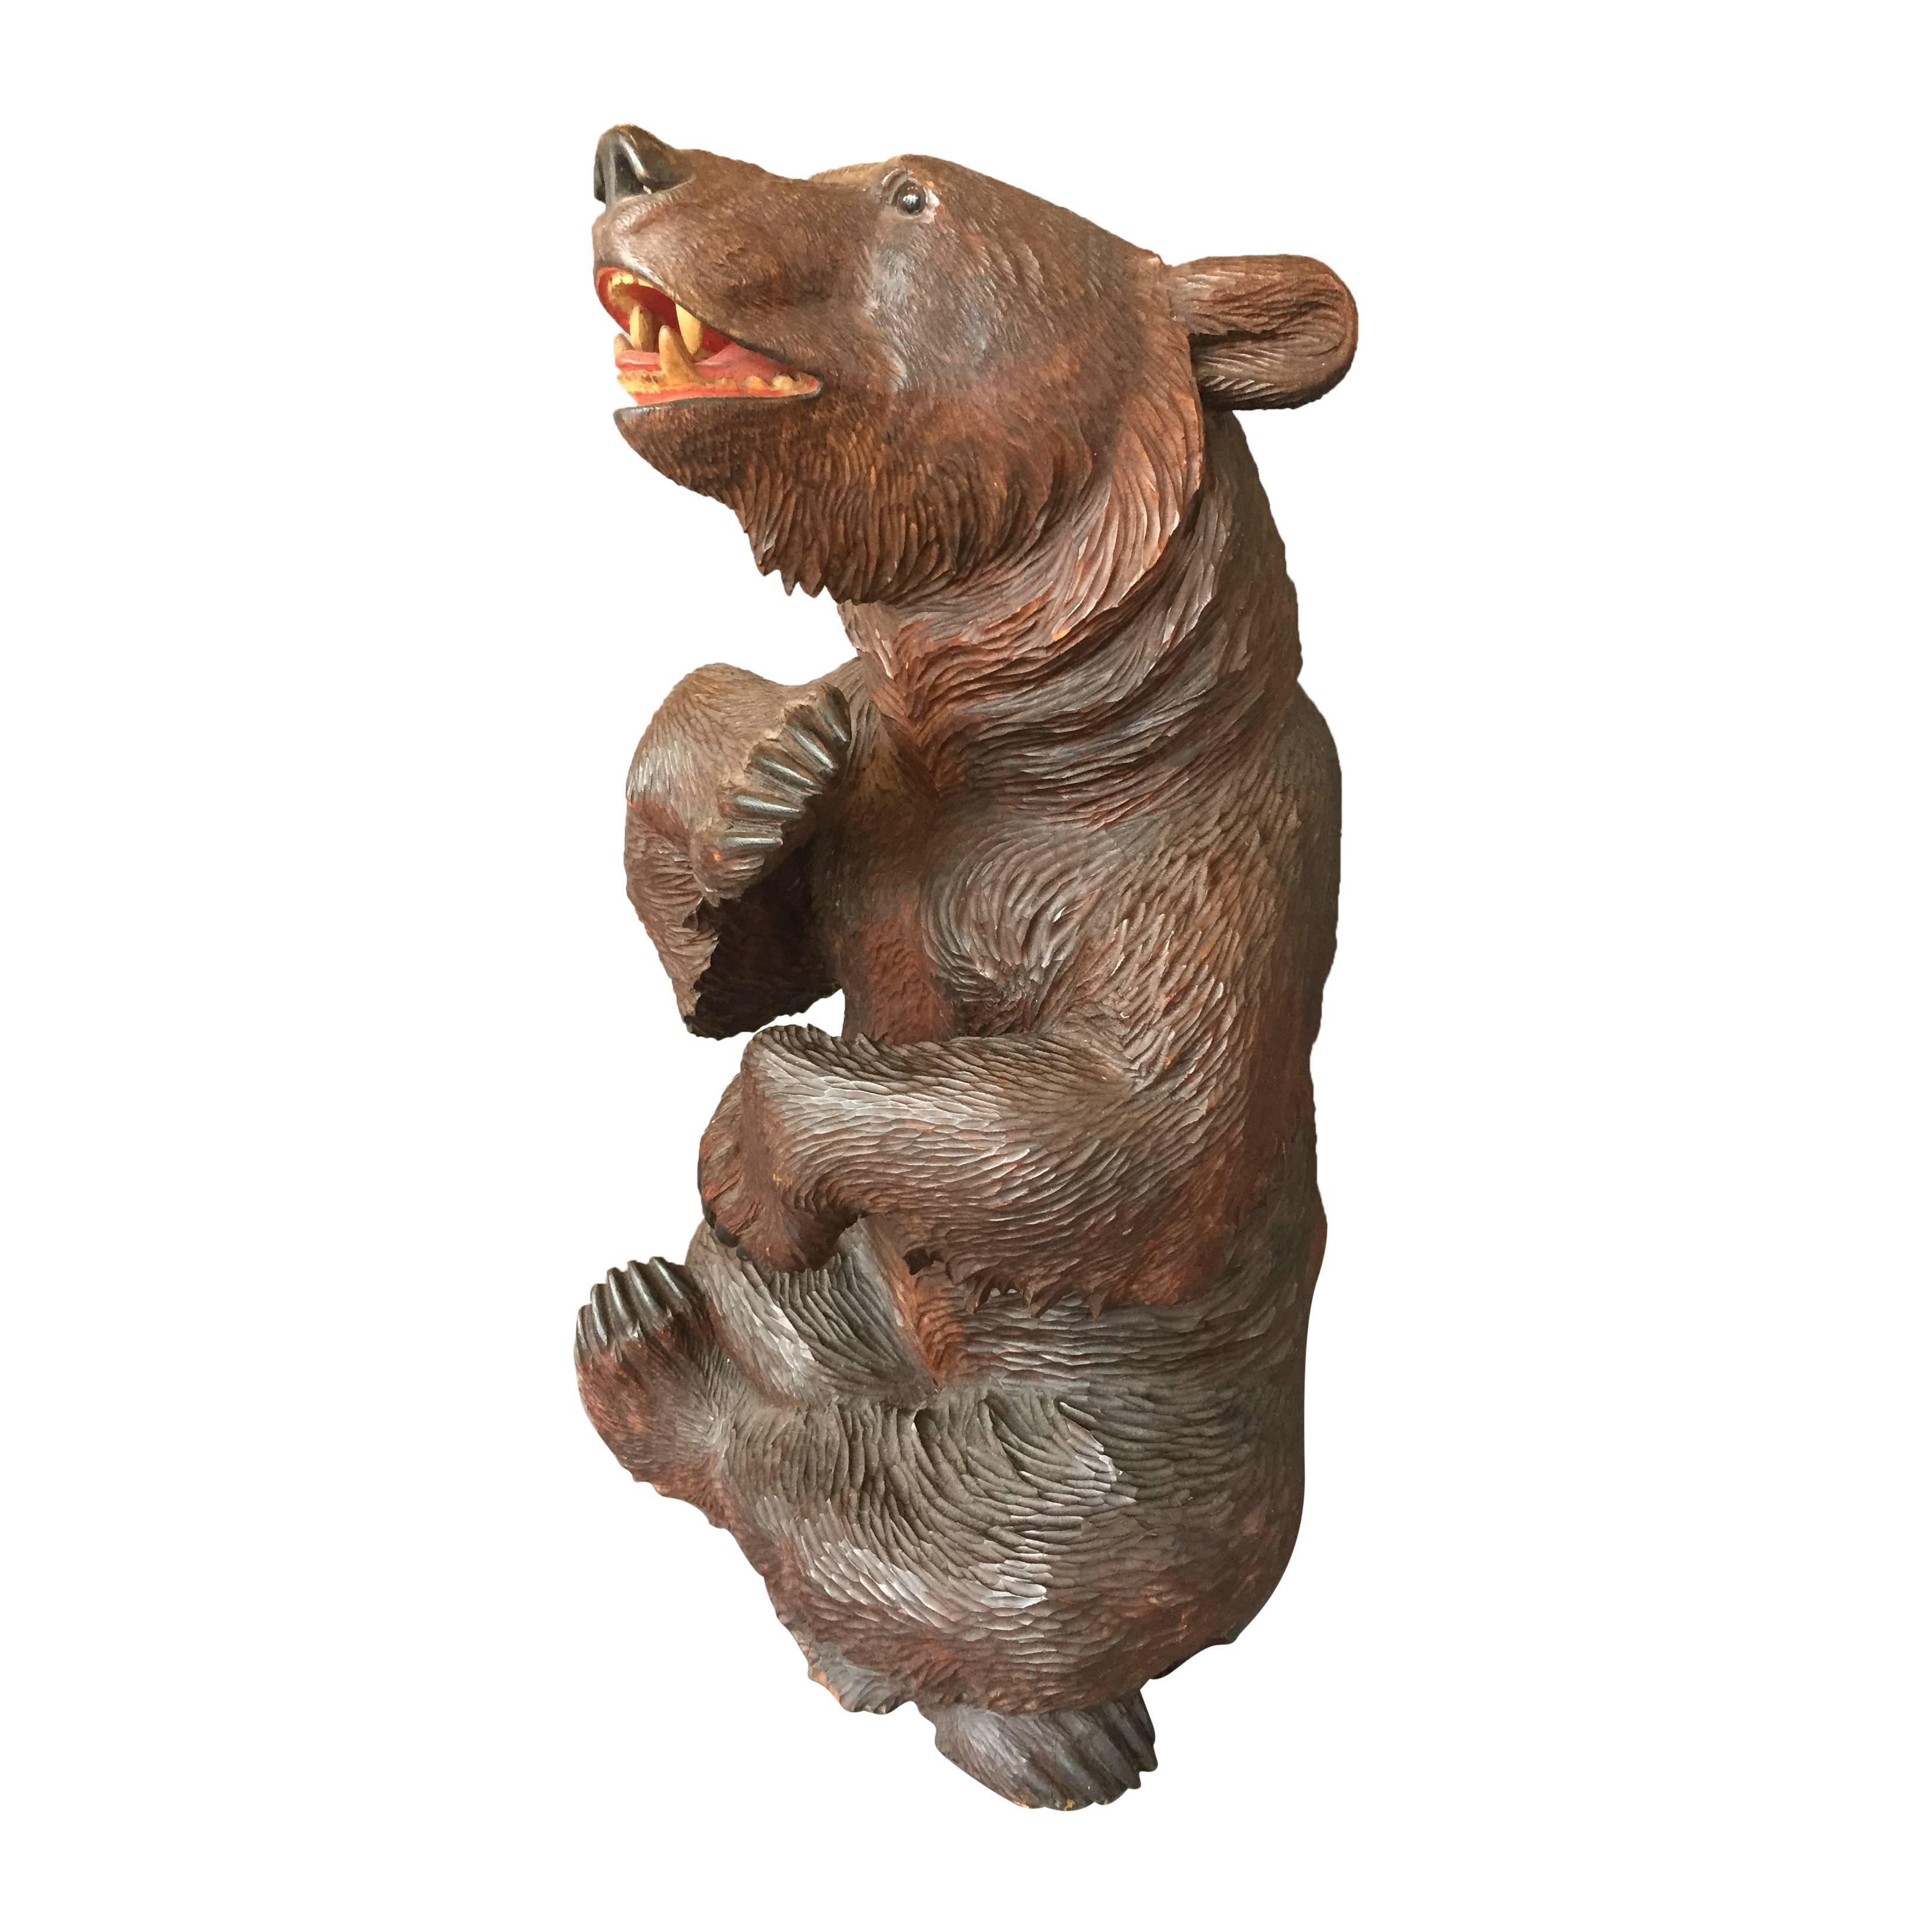 This is a wonderful Swiss Black Forest linden wood carving modeled after a seated bear. It features glass eyes and a hand-painted mouth. Swiss Black Forest bear carvings were popular amongst Victorian tourists, as they were a familiar animal to both